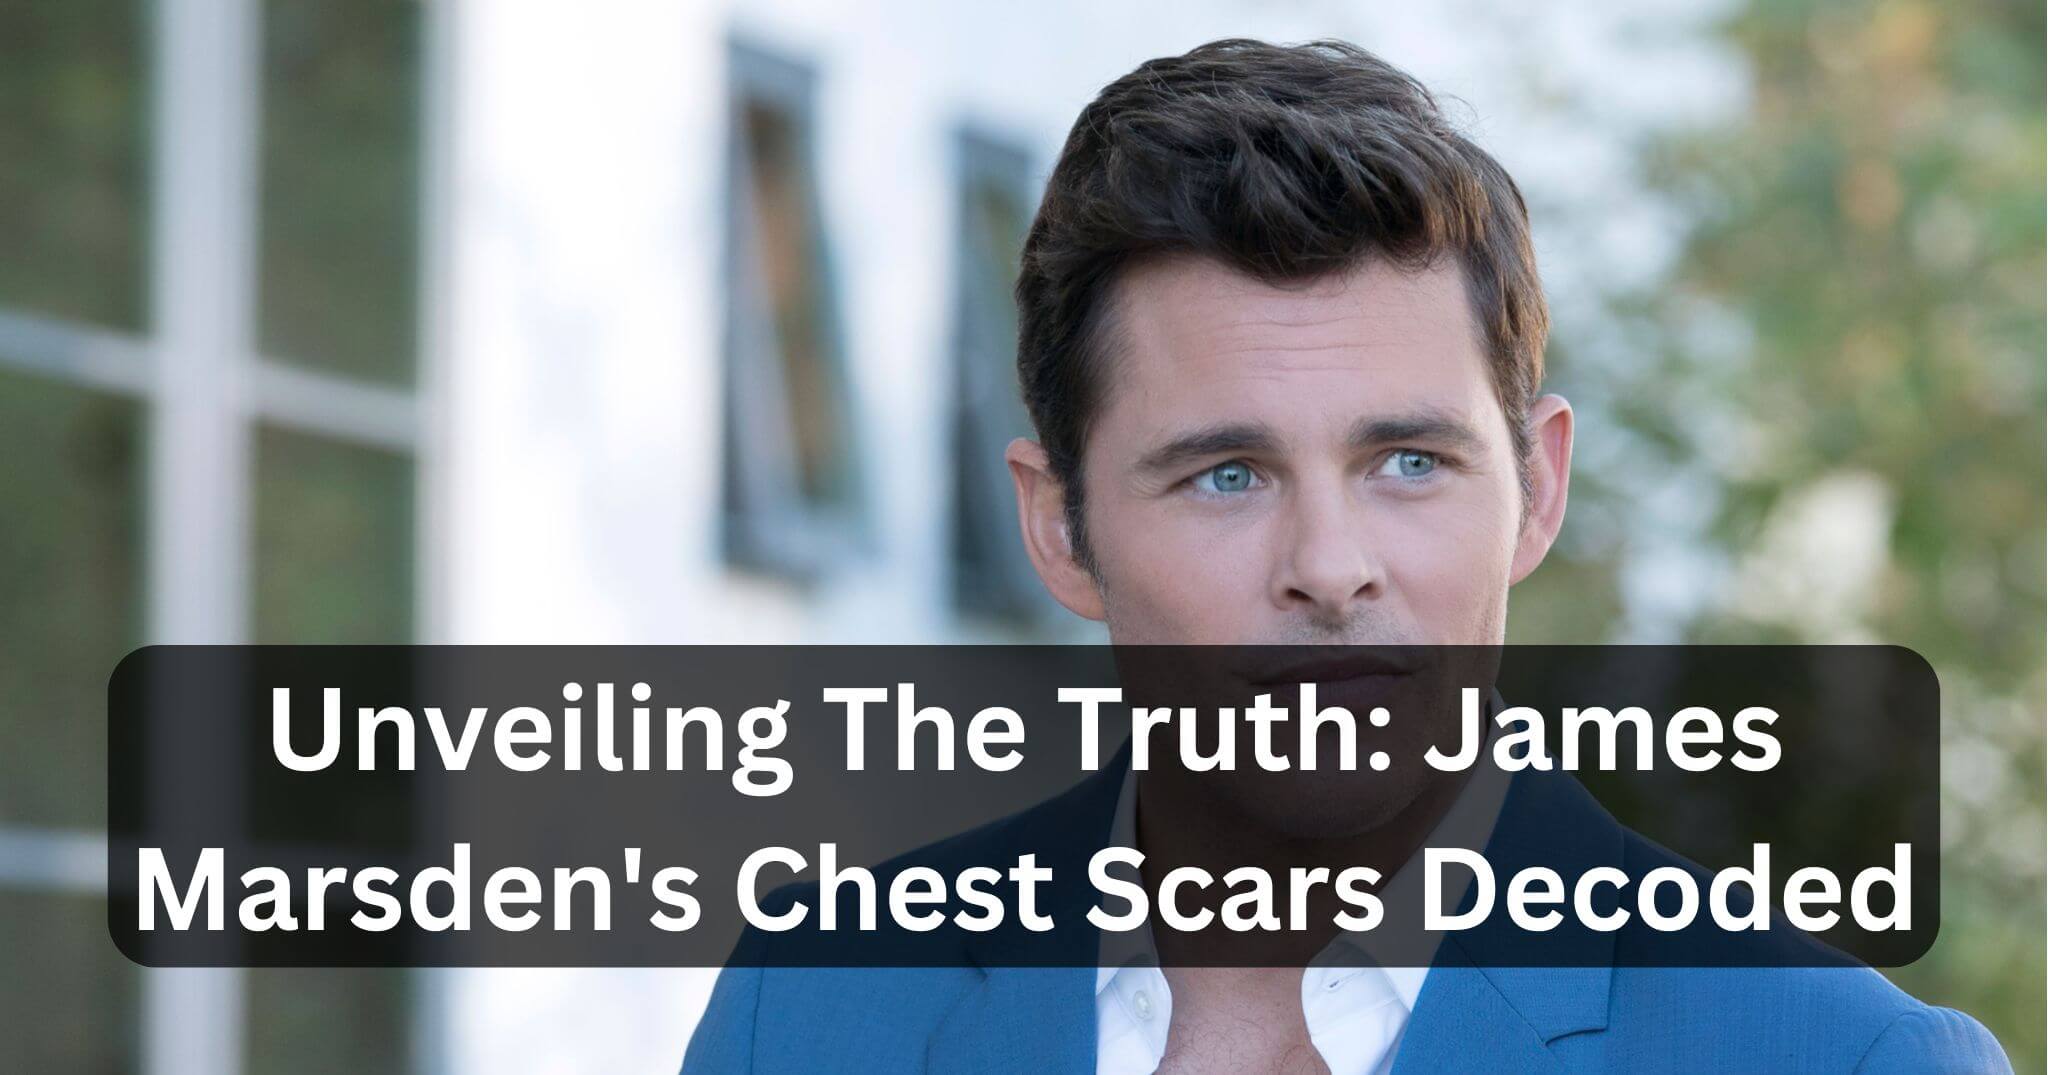 Unveiling The Truth James Marsden's Chest Scars Decoded